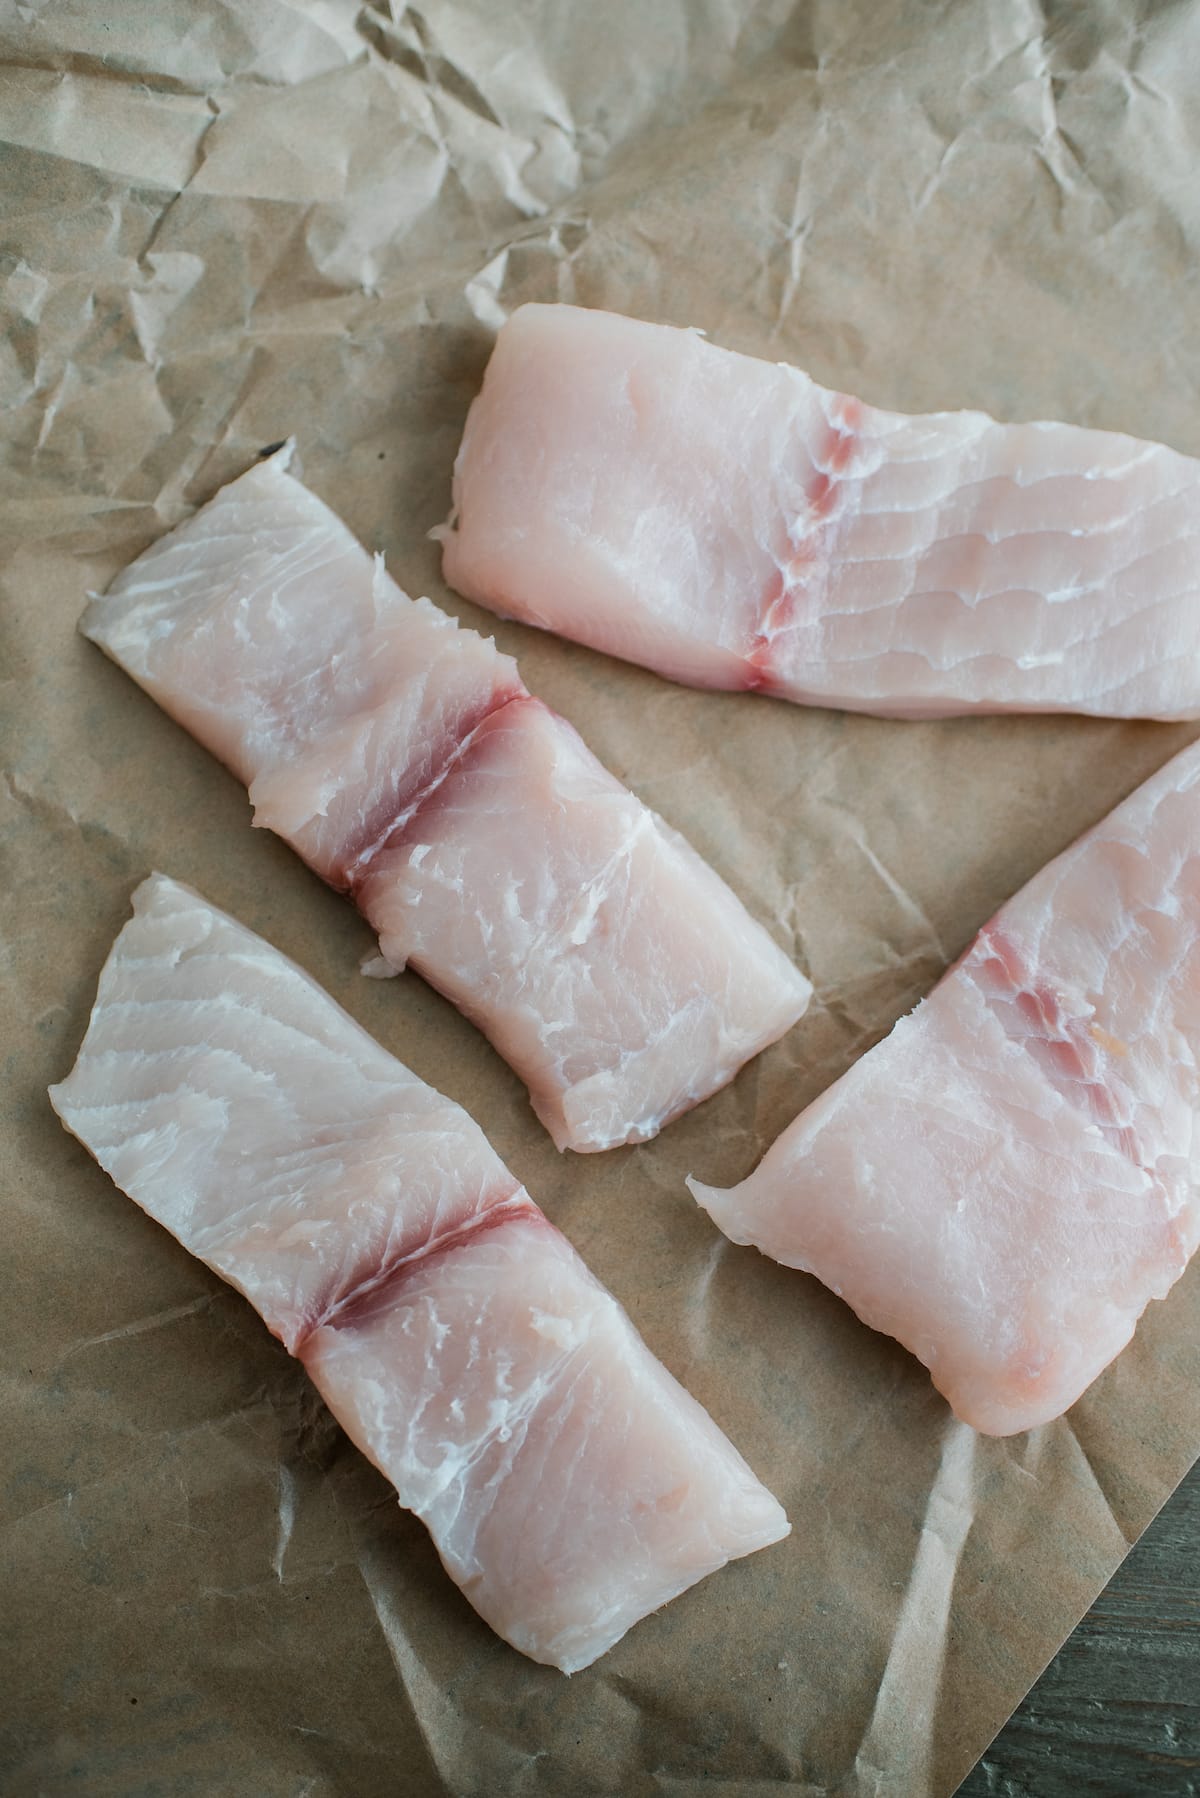 Four pieces of raw cod ready for cooking.